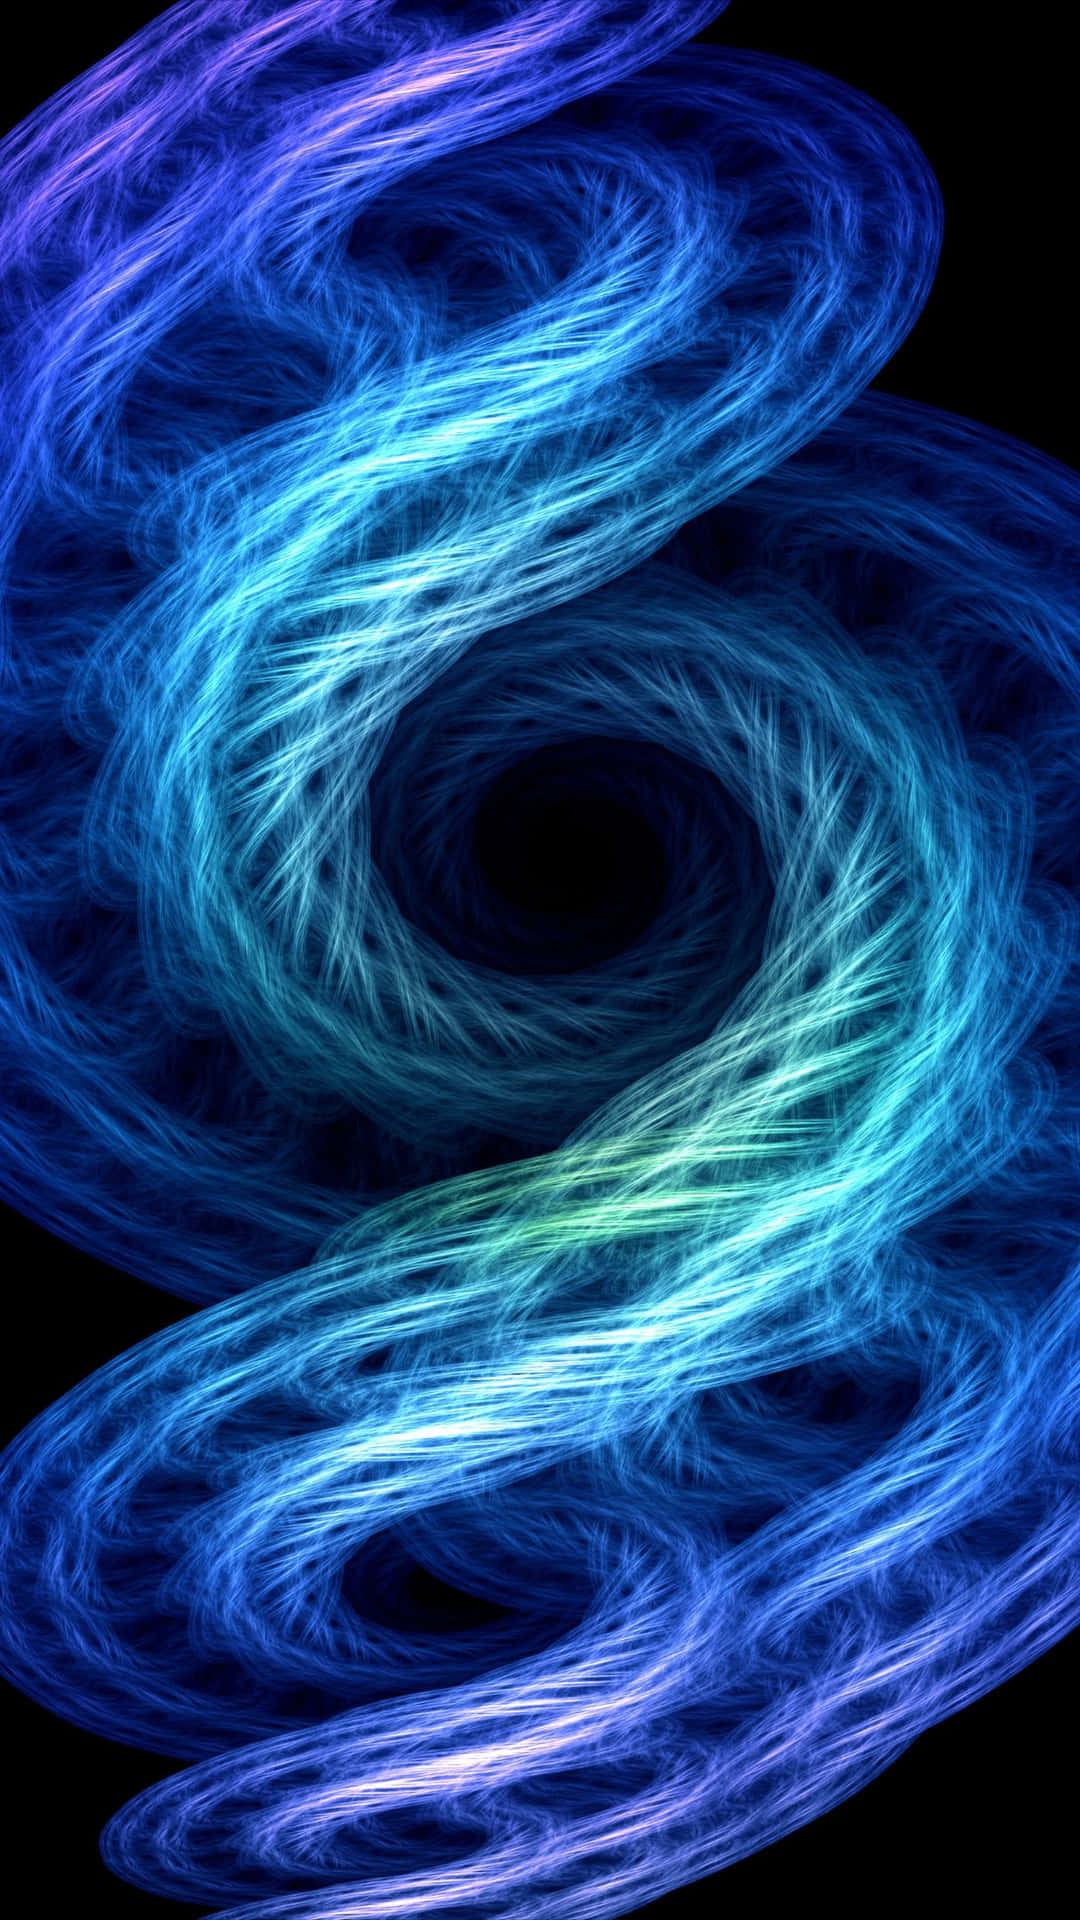 A Blue And Blue Spiral On A Black Background